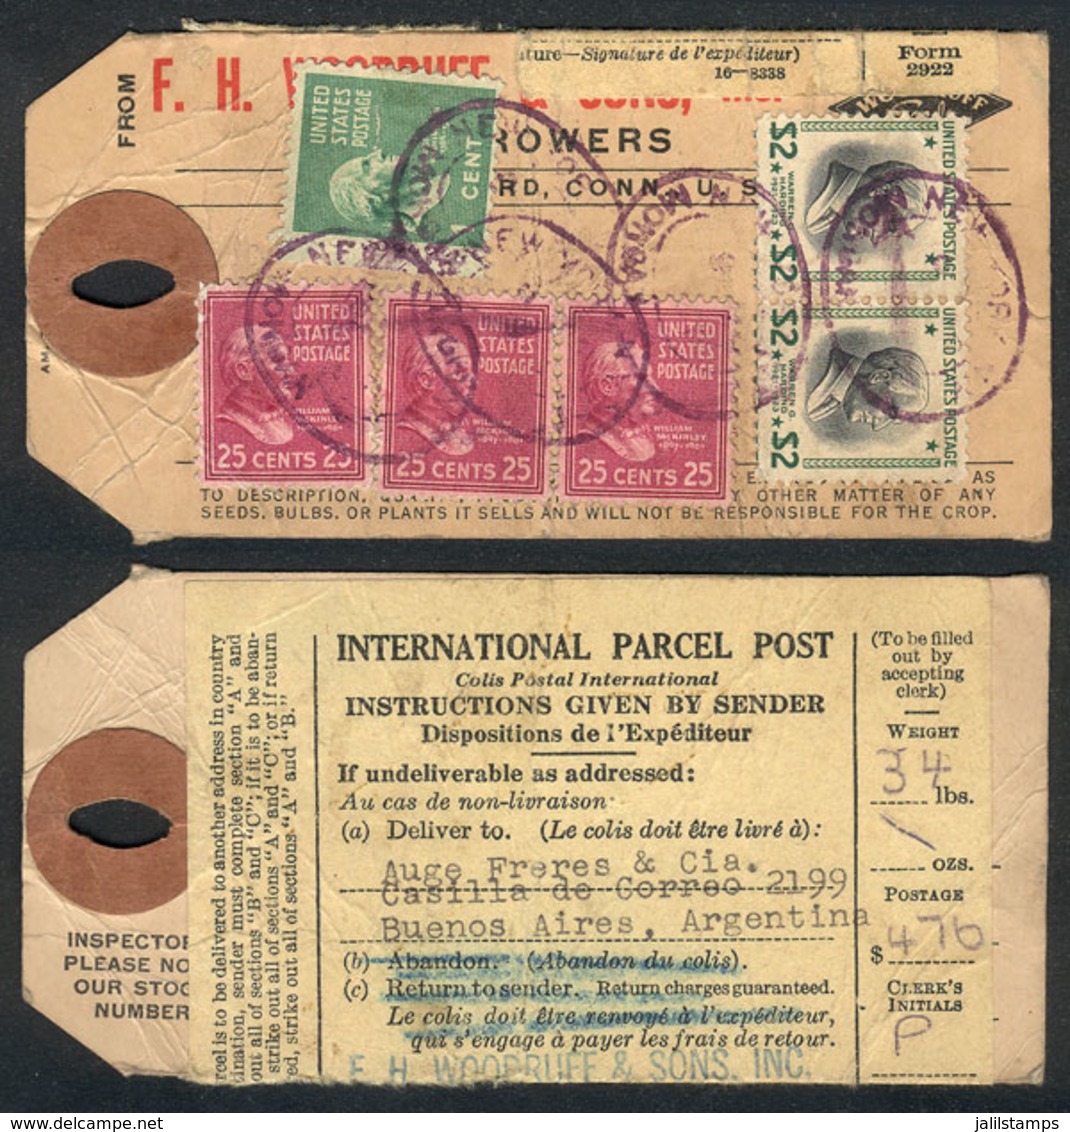 UNITED STATES: International Parcel Post Tag Sent To Argentina With Spectacular Postage Of $5.76, Very Fine Quality! - Postal History